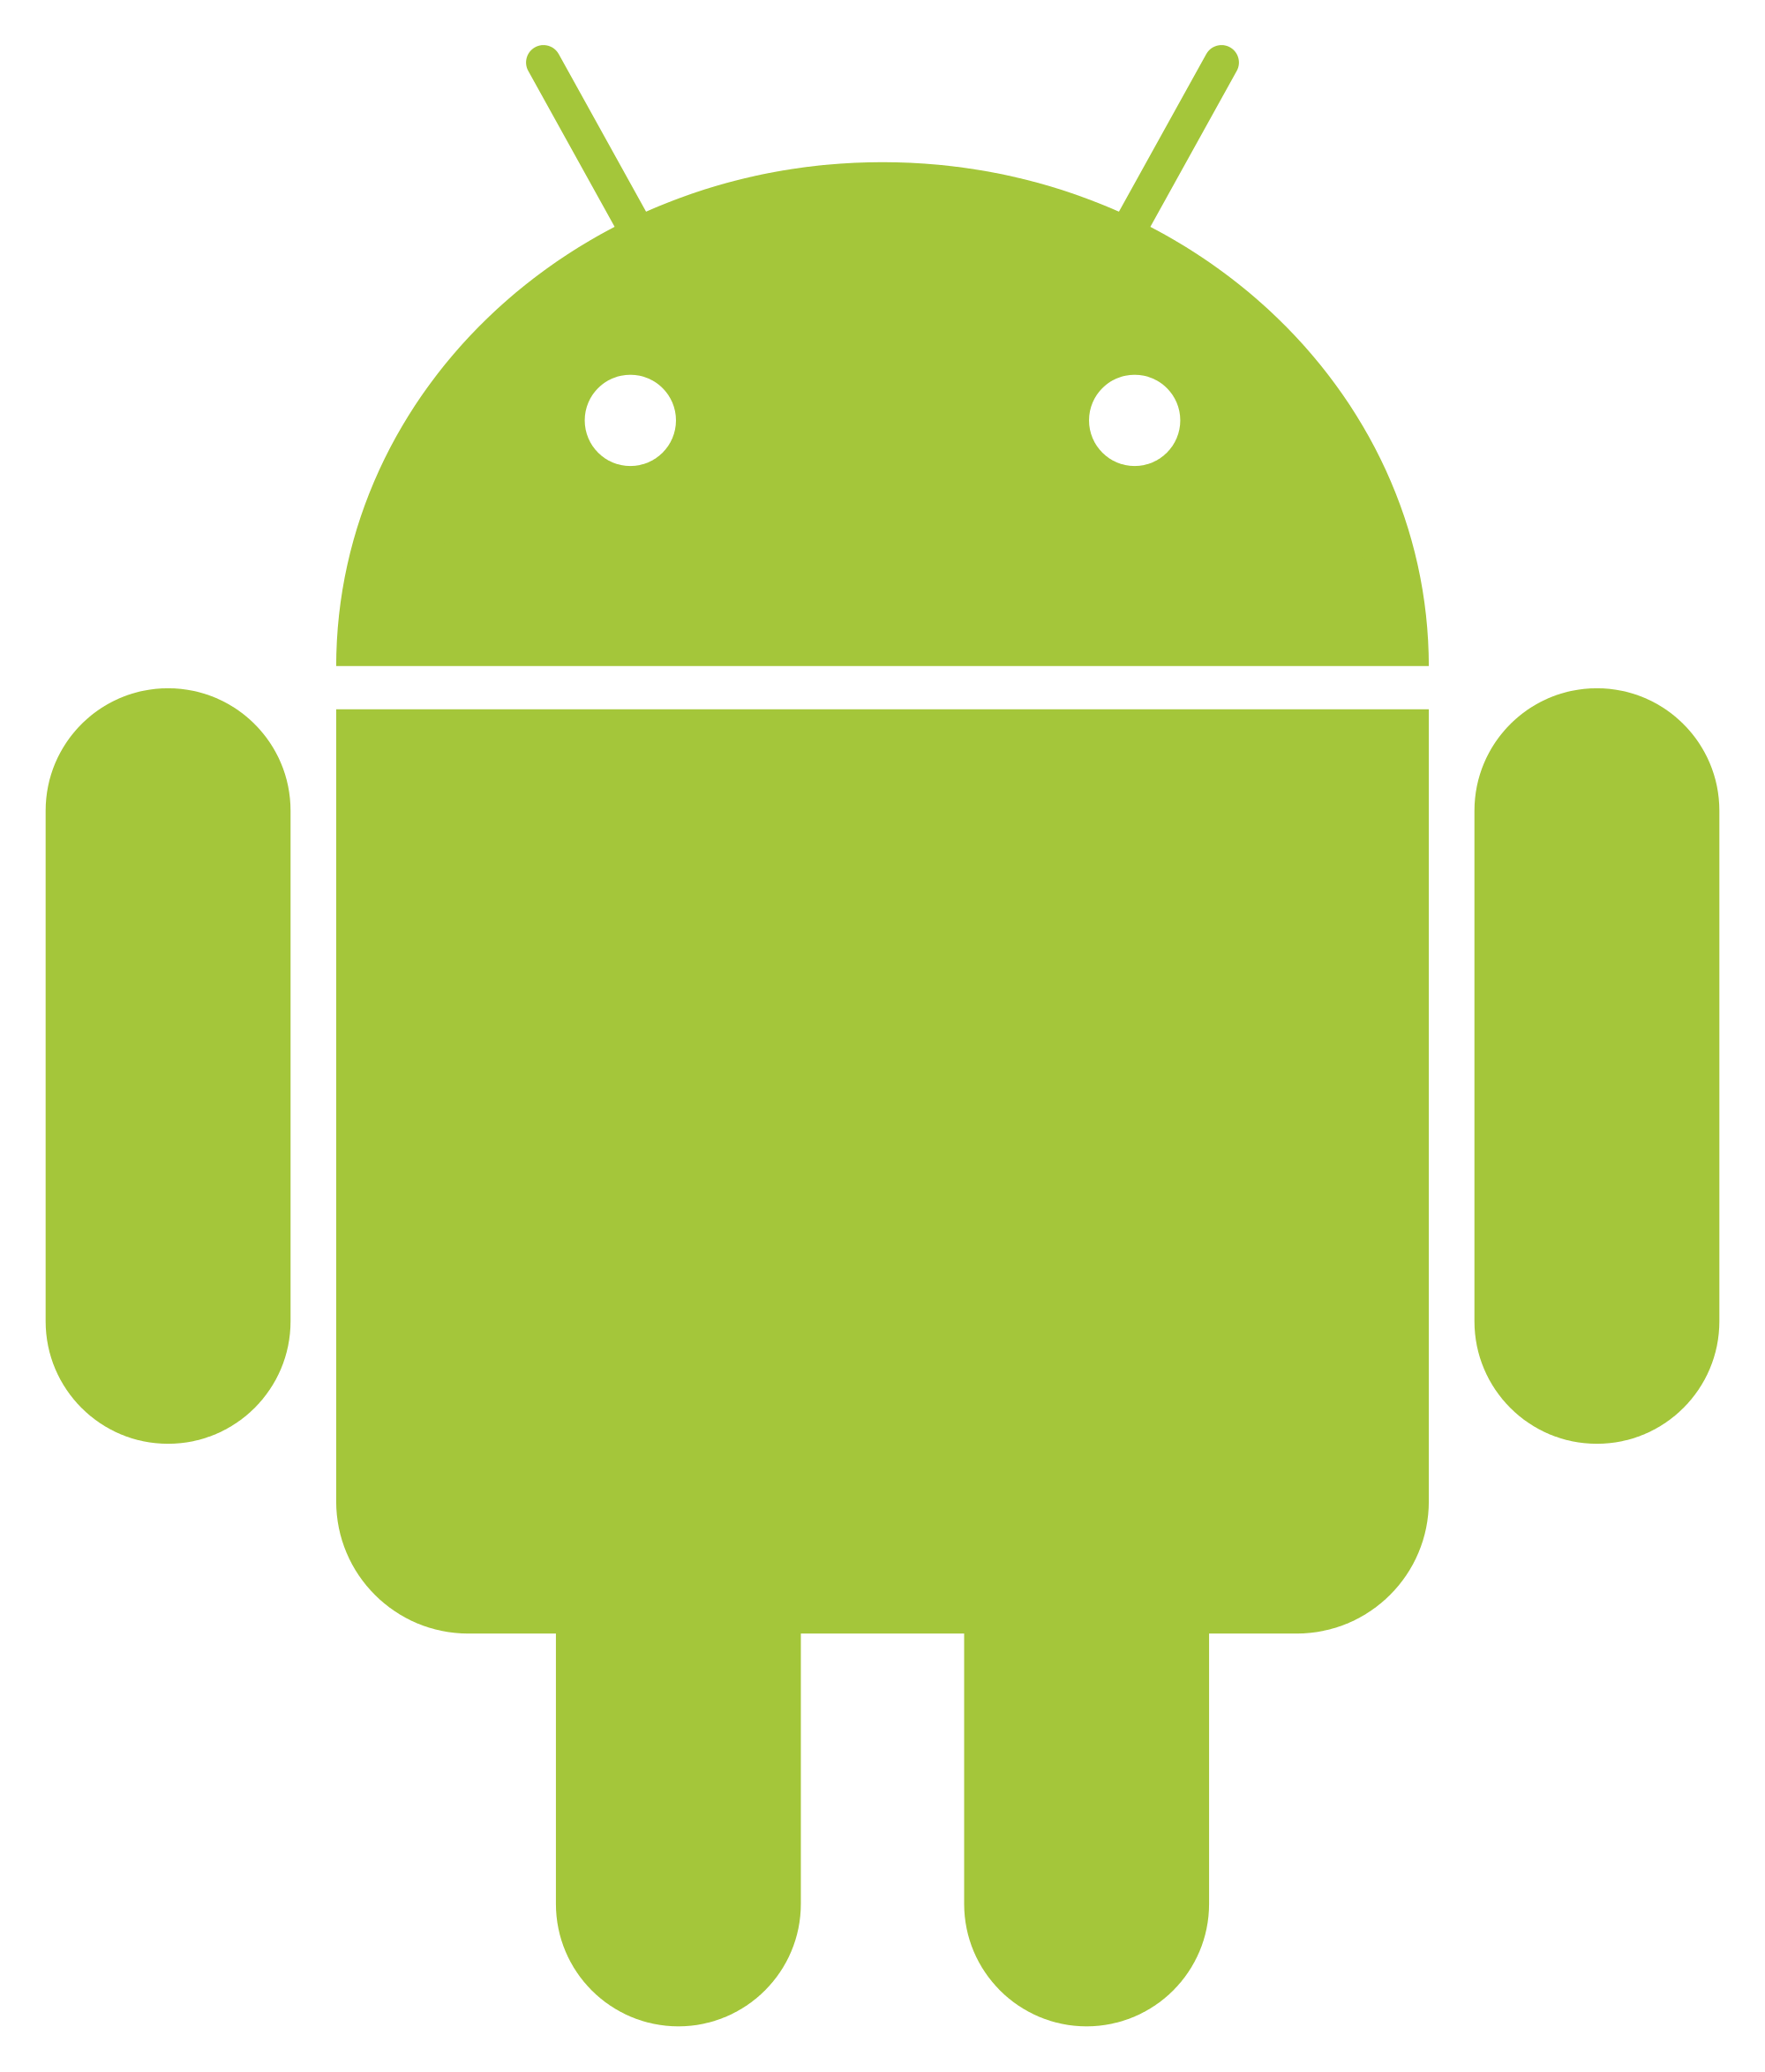 Android logo